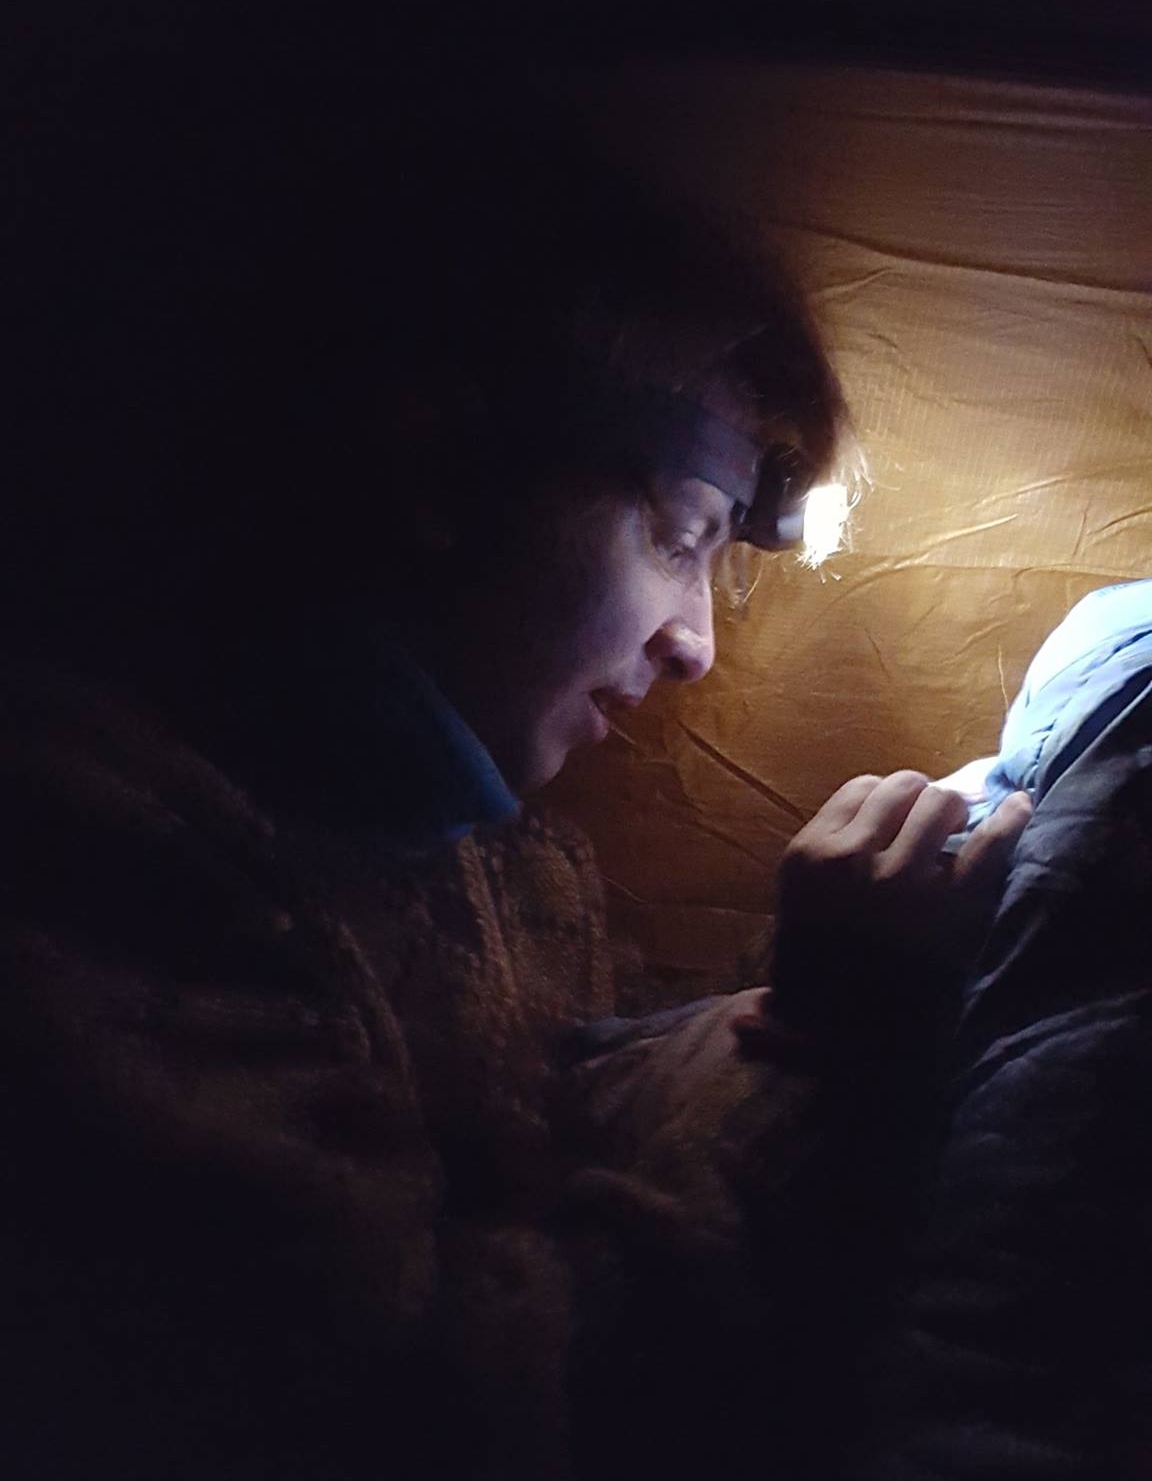 A picture of myself fiddling with a sleeping bag in a dark tent, illuminated only by me headlamp.